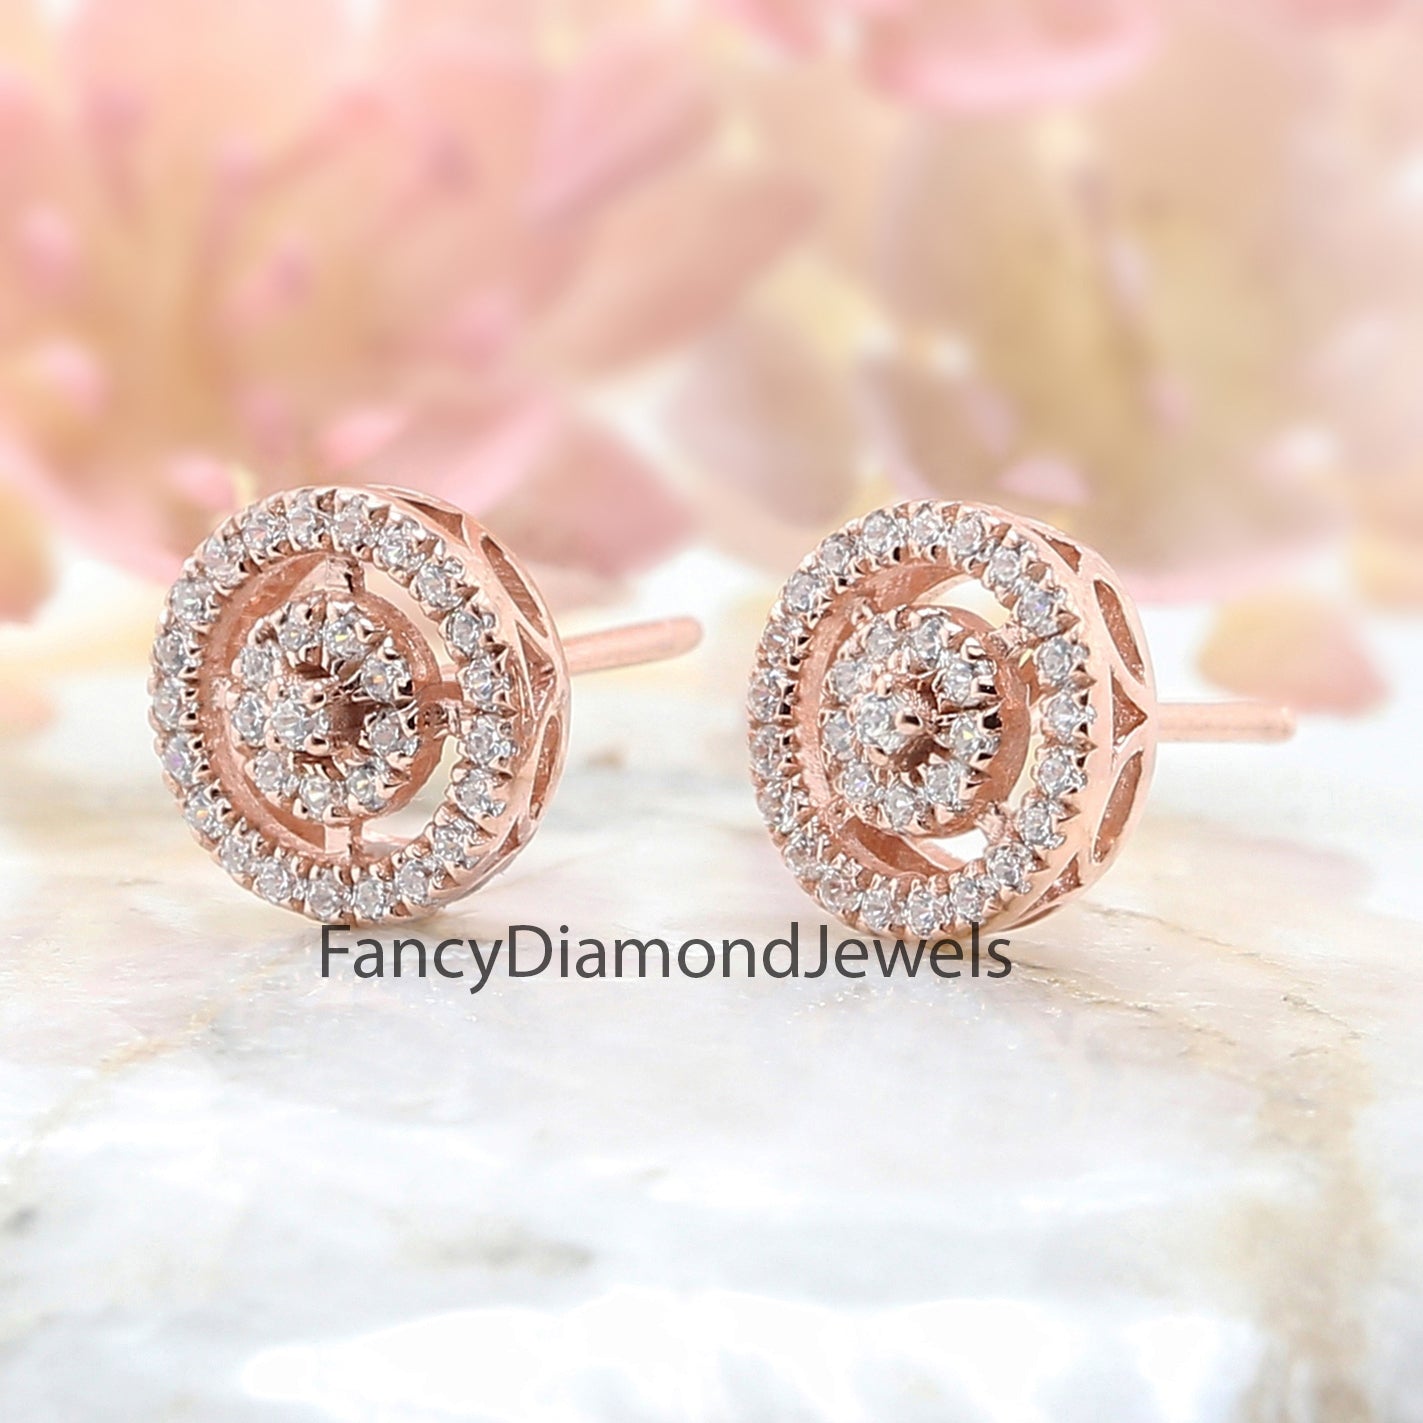 Round White Color Diamond Earring Engagement Wedding Gift Earring 14K Solid Rose White Yellow Gold Earring 0.43 CT KD978